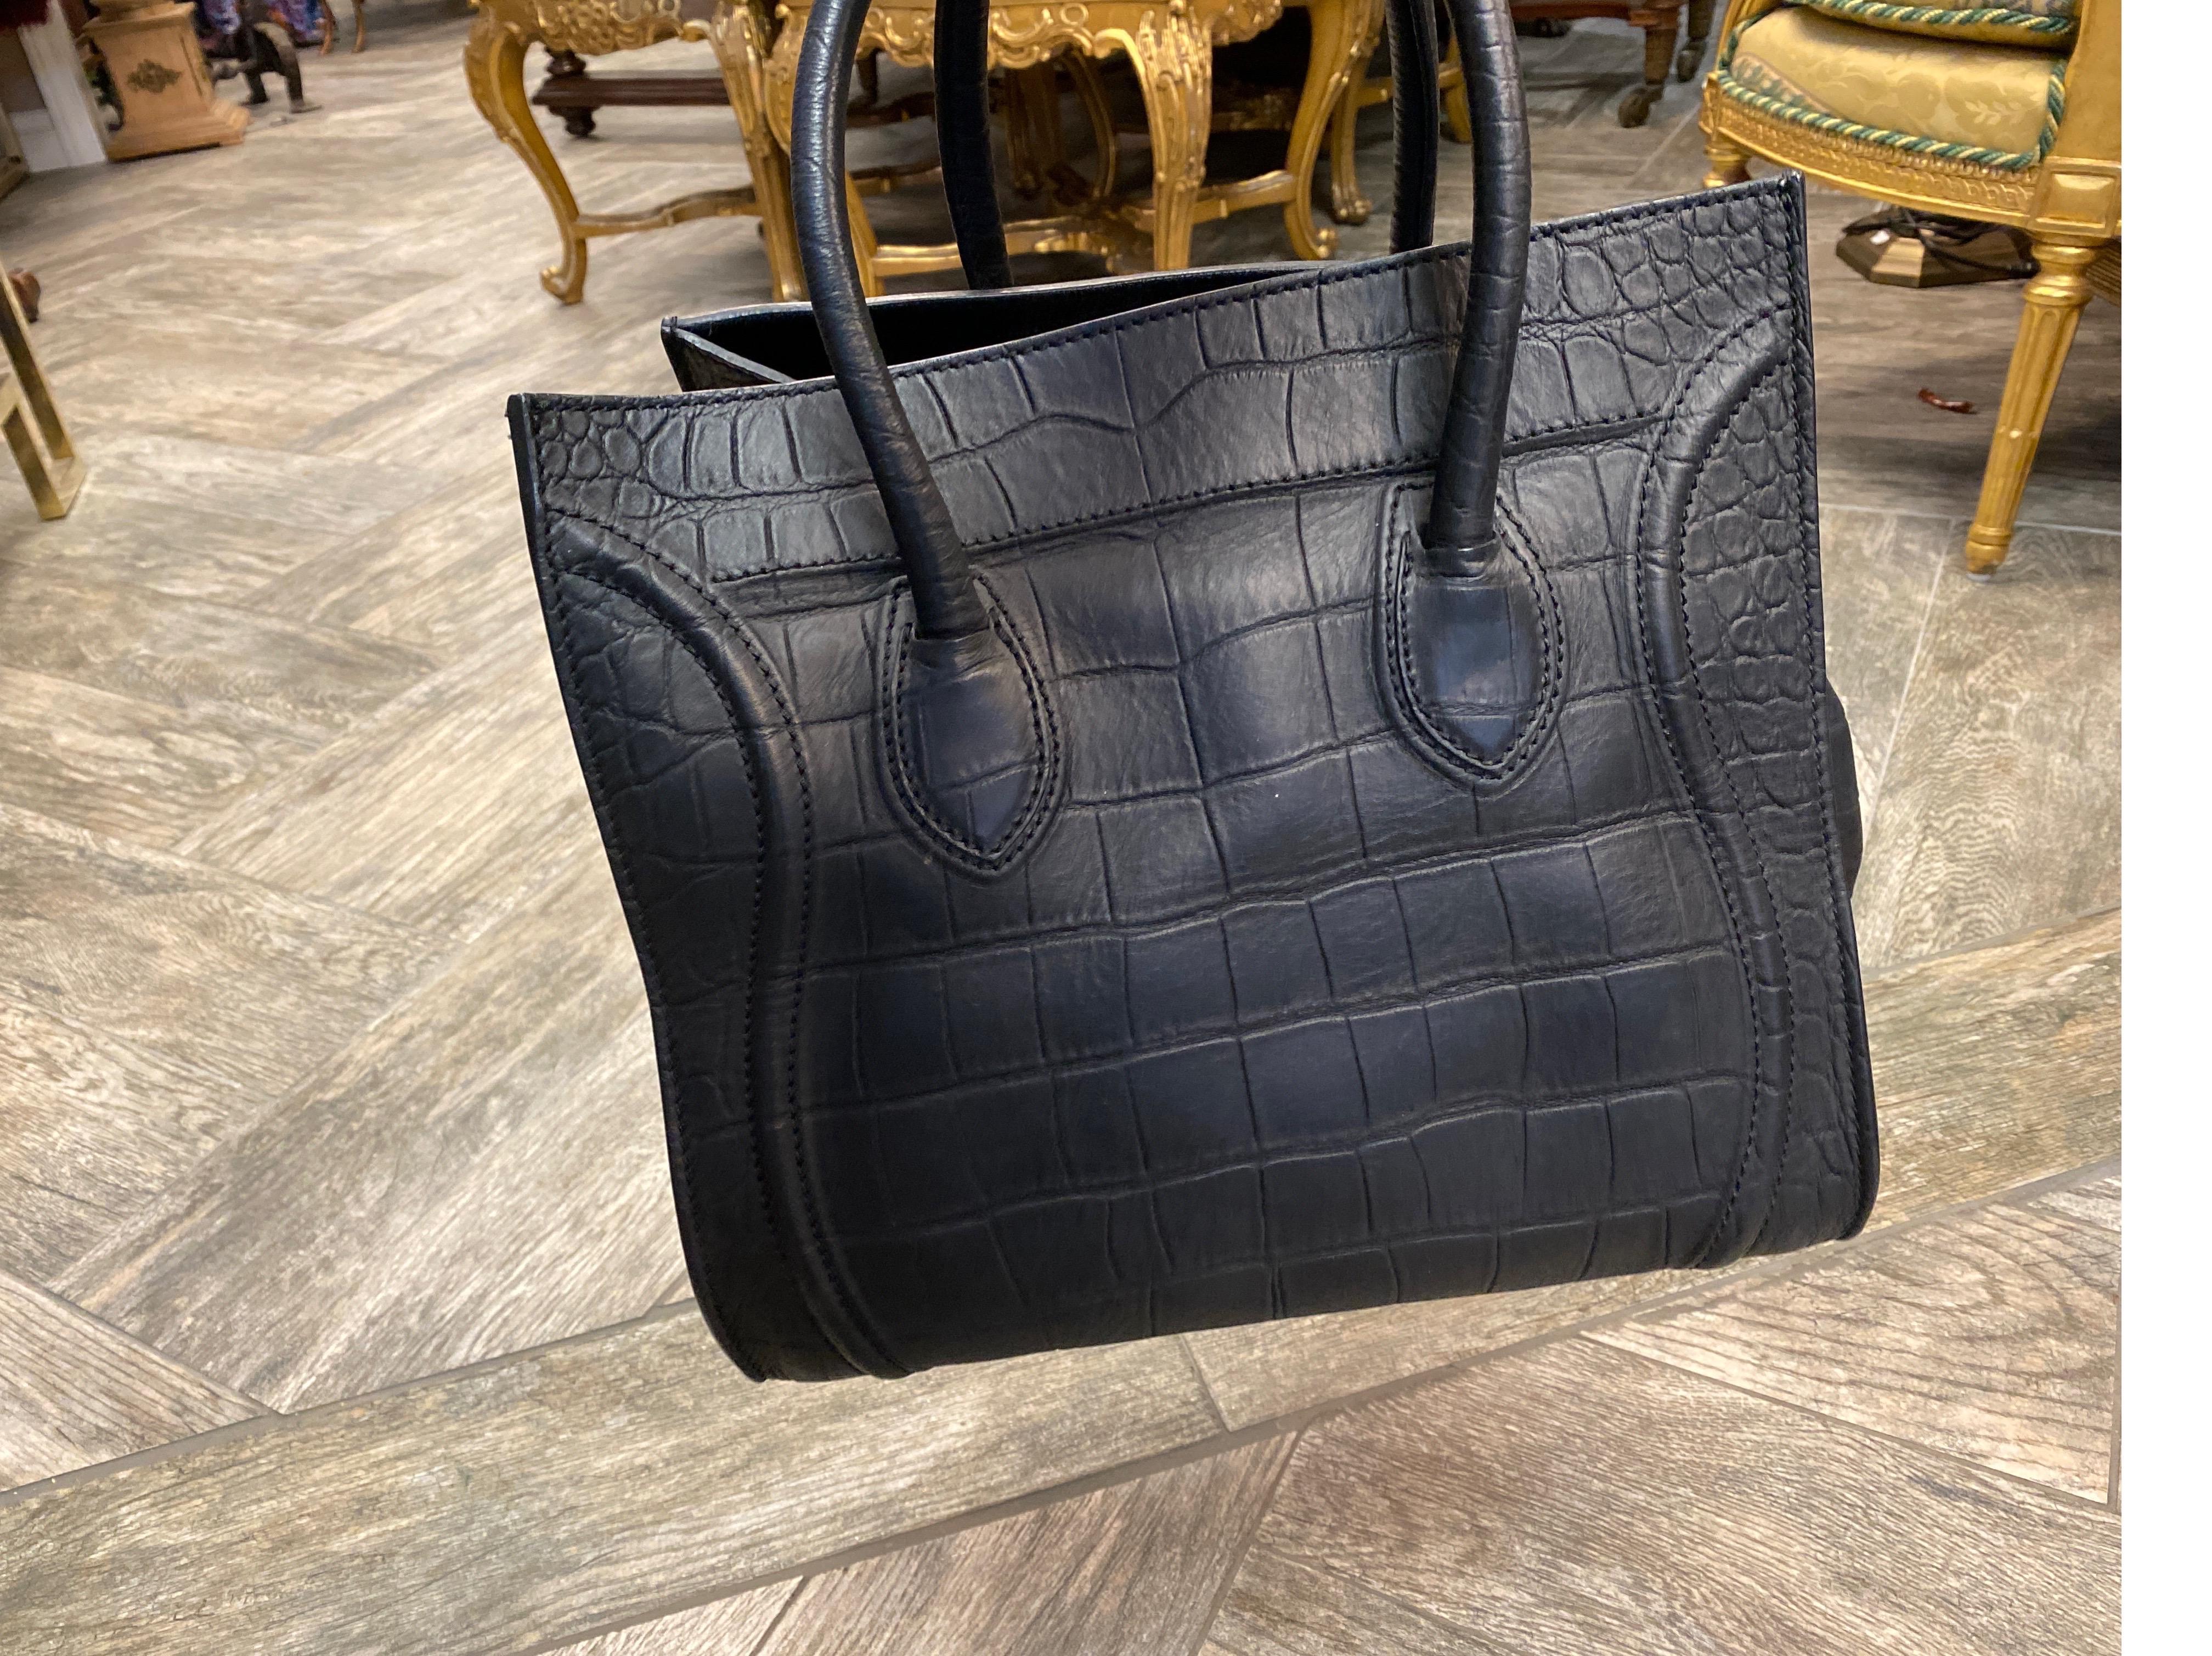 Original Celine
Black Crocodile
Condition: Excellent 
Dust Bad Included
Height with a Handle 15 Inches
Width 13 Inches 